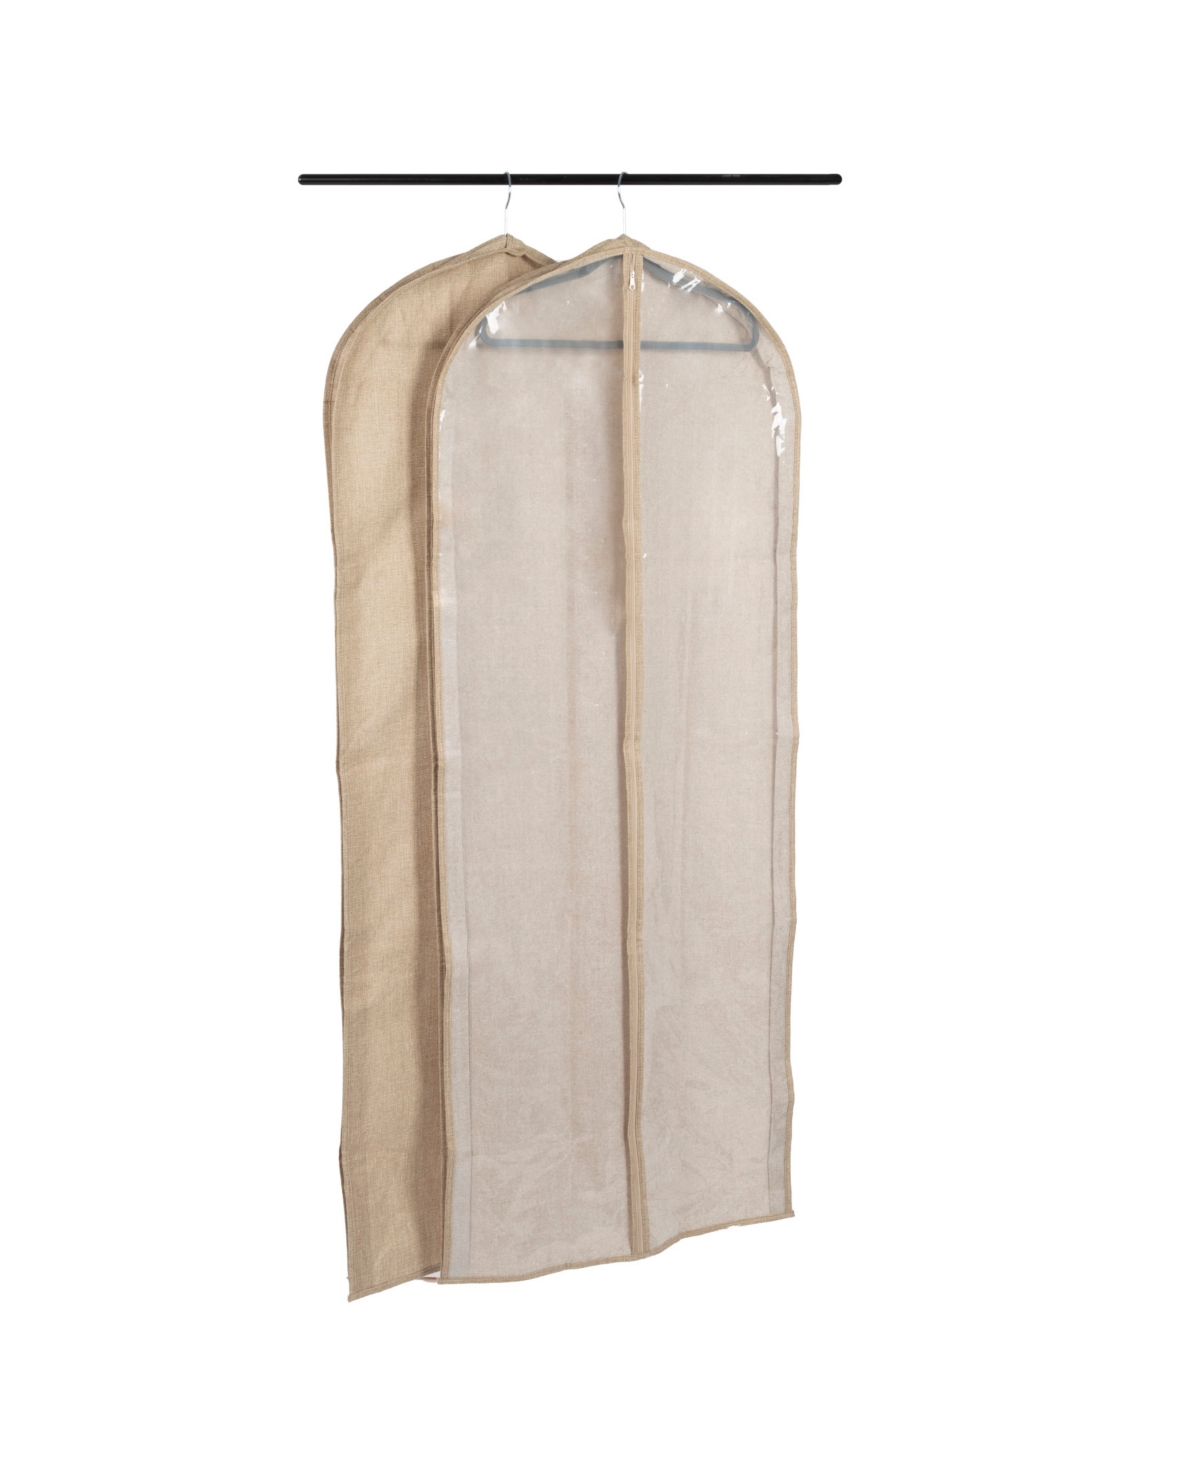 Household Essentials Hanging Zippered Garment Storage Bag With Clear Vision Front, Set Of 2 In Beige